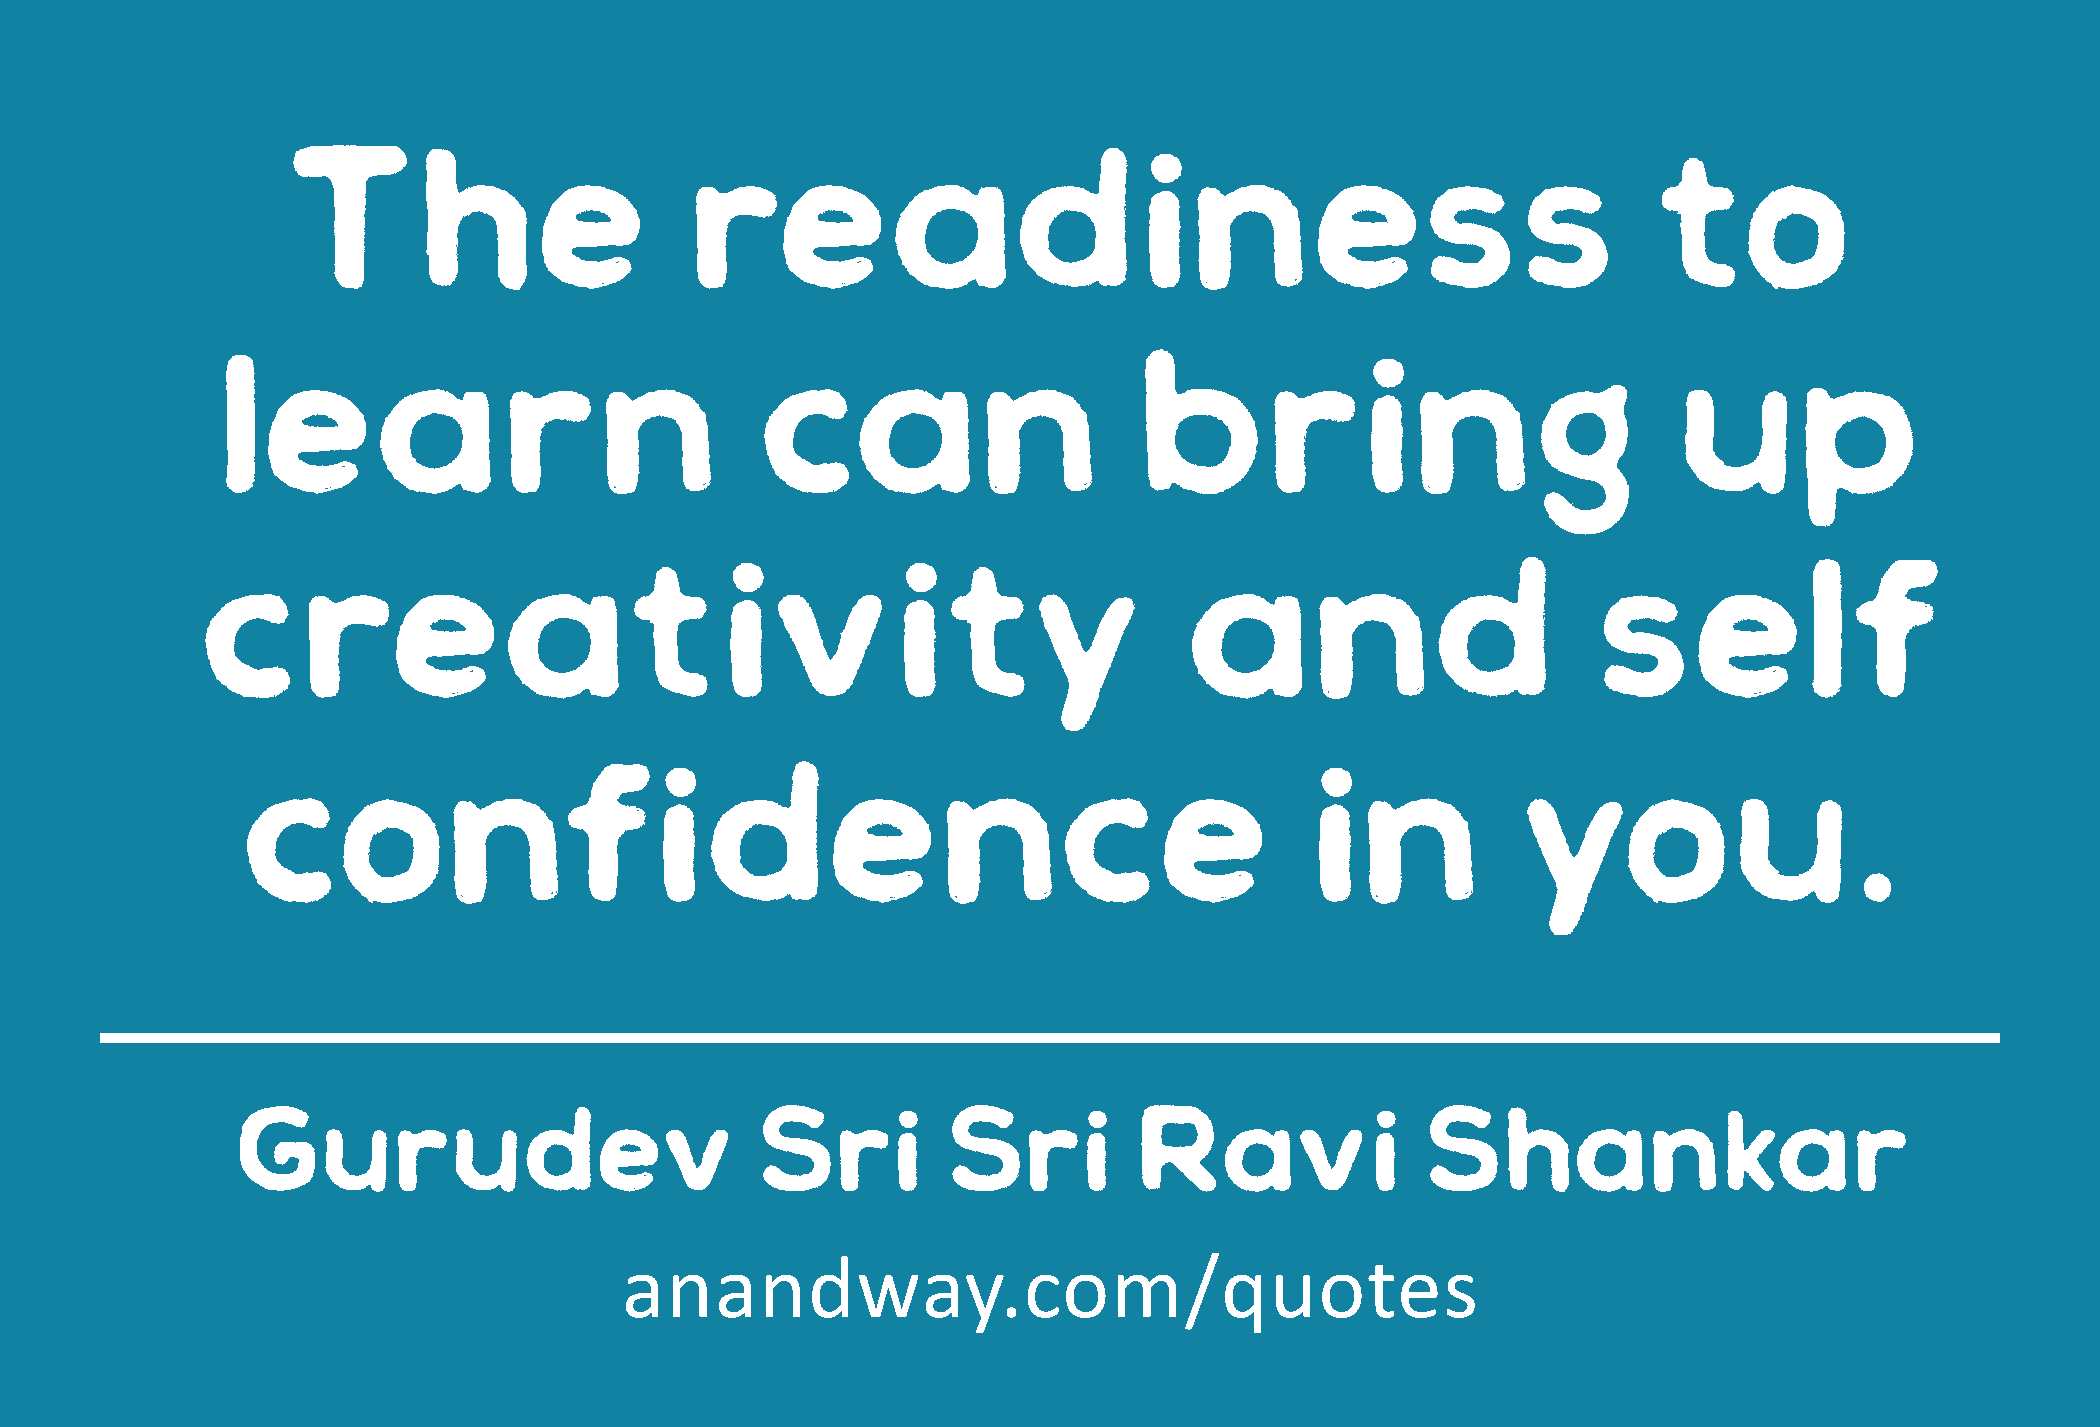 The readiness to learn can bring up creativity and self confidence in you. 
 -Gurudev Sri Sri Ravi Shankar